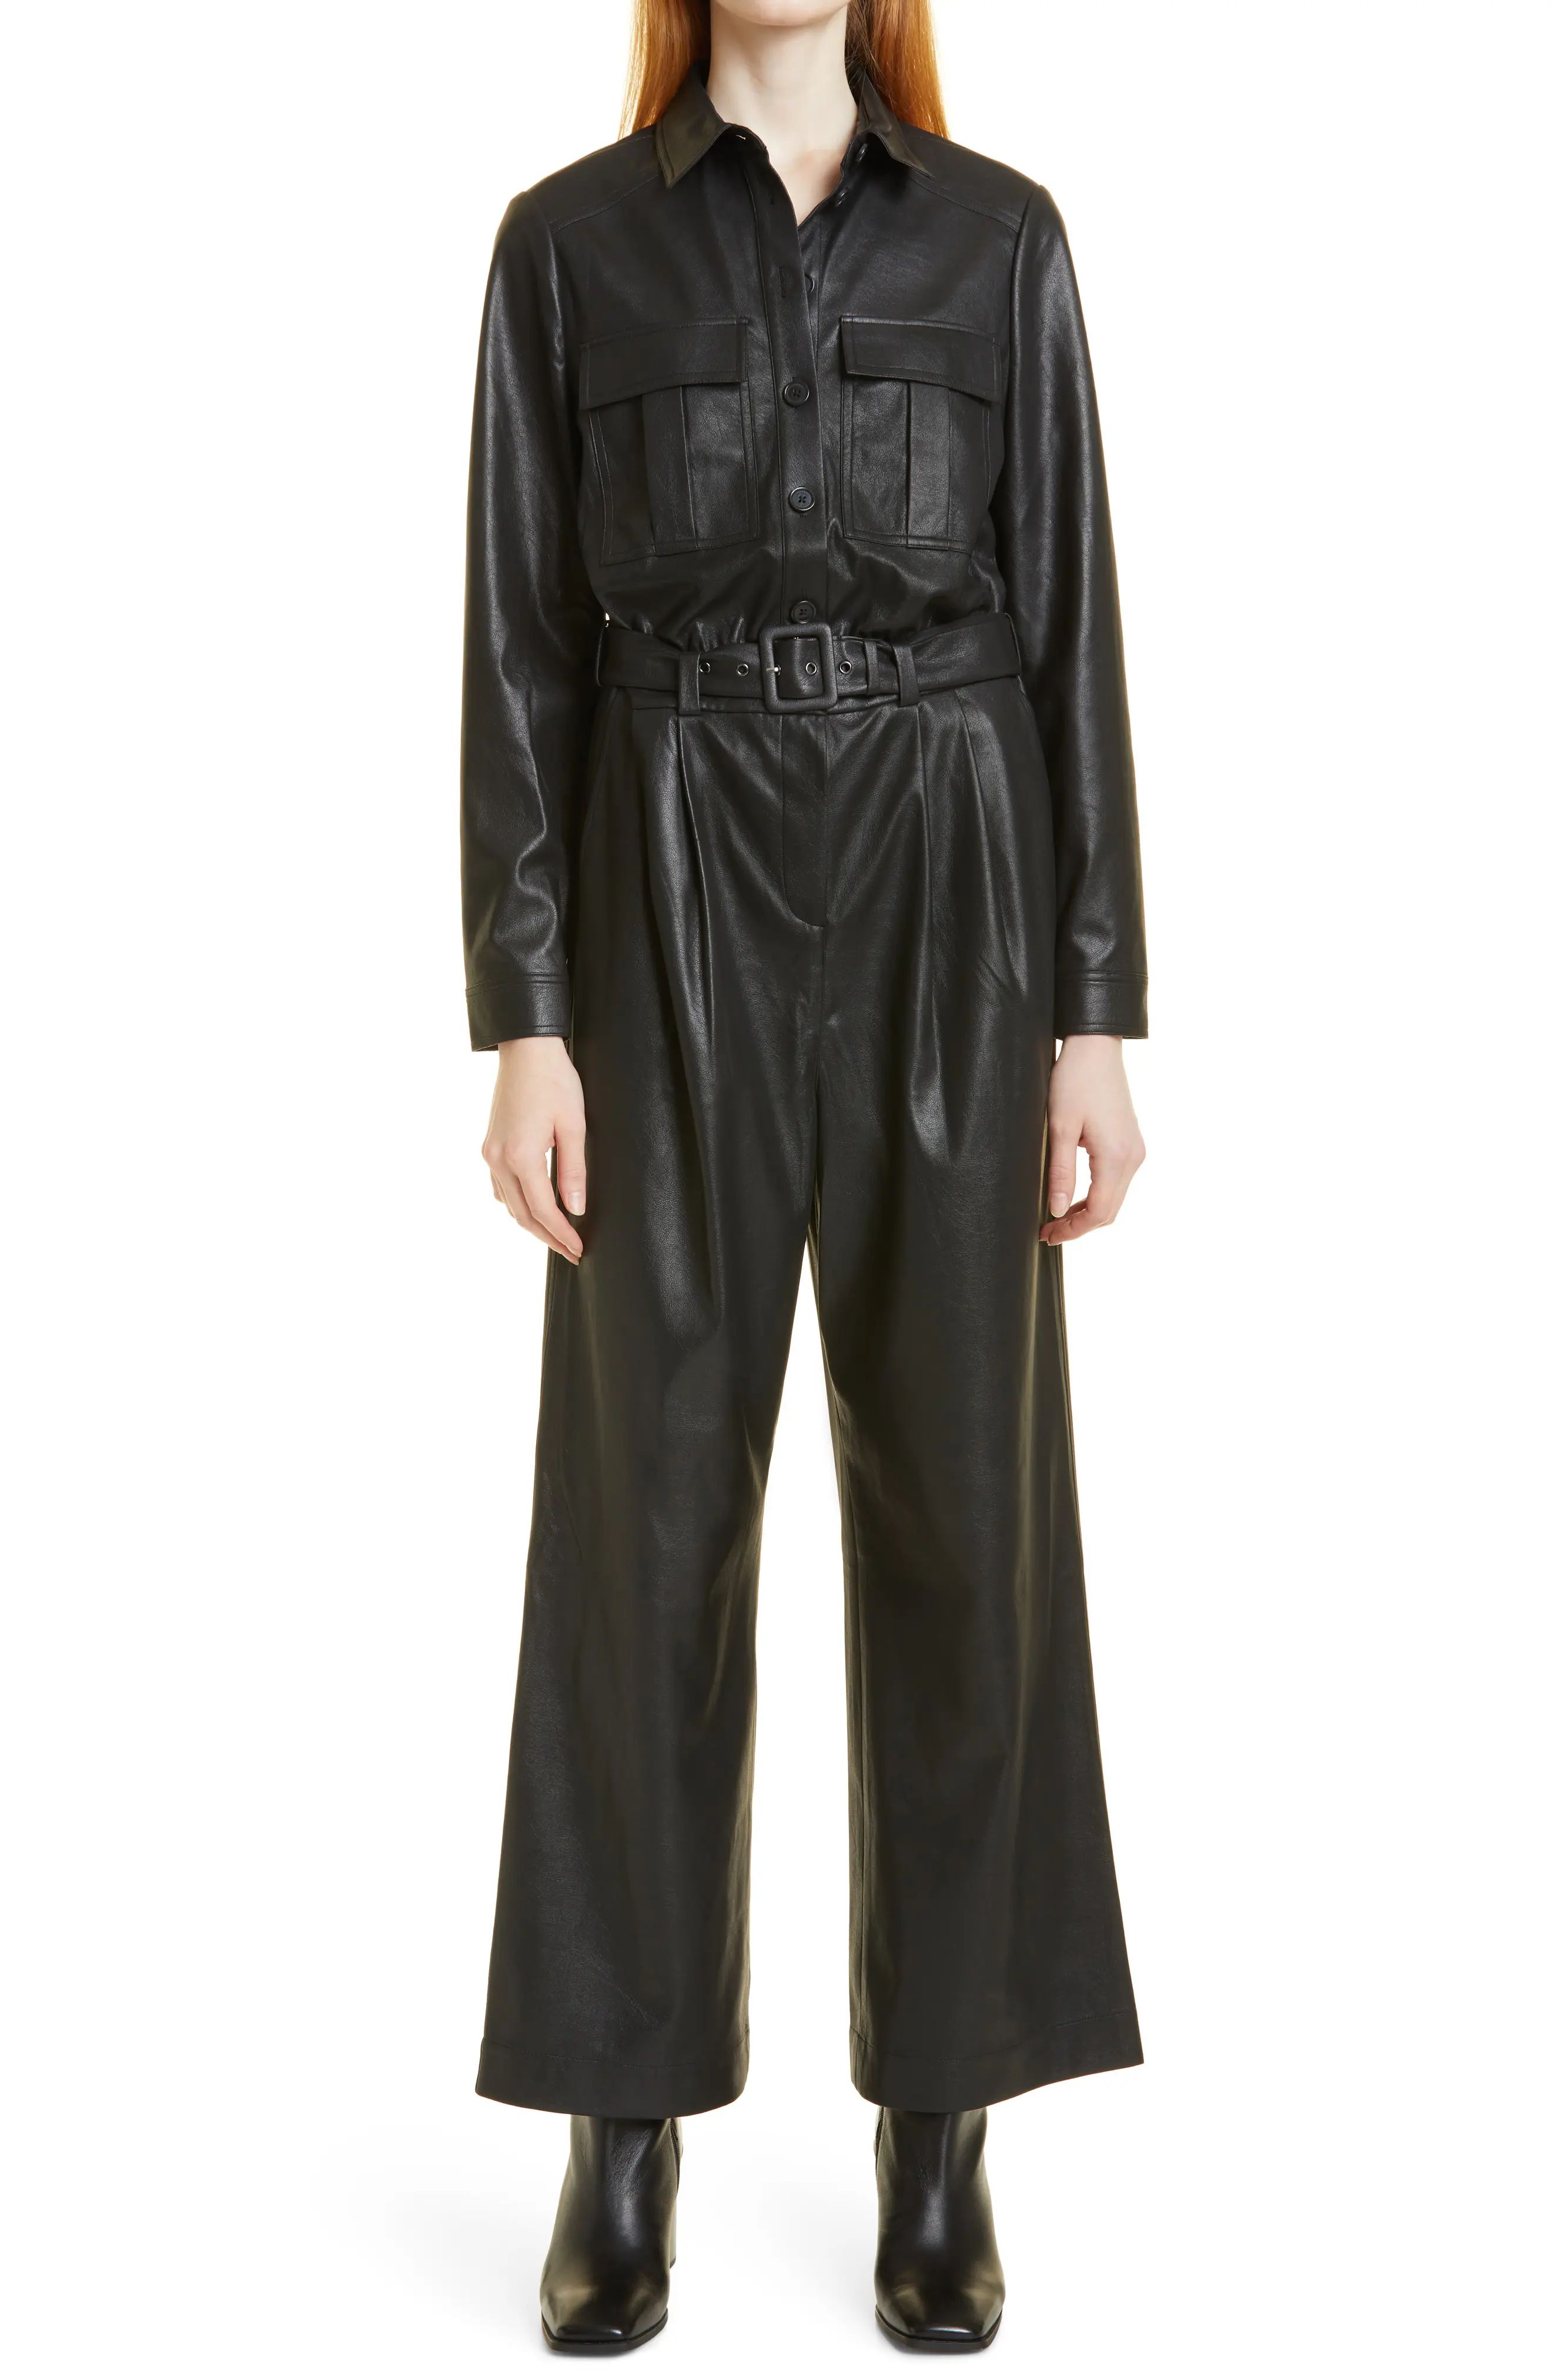 Ted Baker London Tesoro Belted Long Sleeve Faux Leather Jumpsuit, Size 3 in Black at Nordstrom | Nordstrom